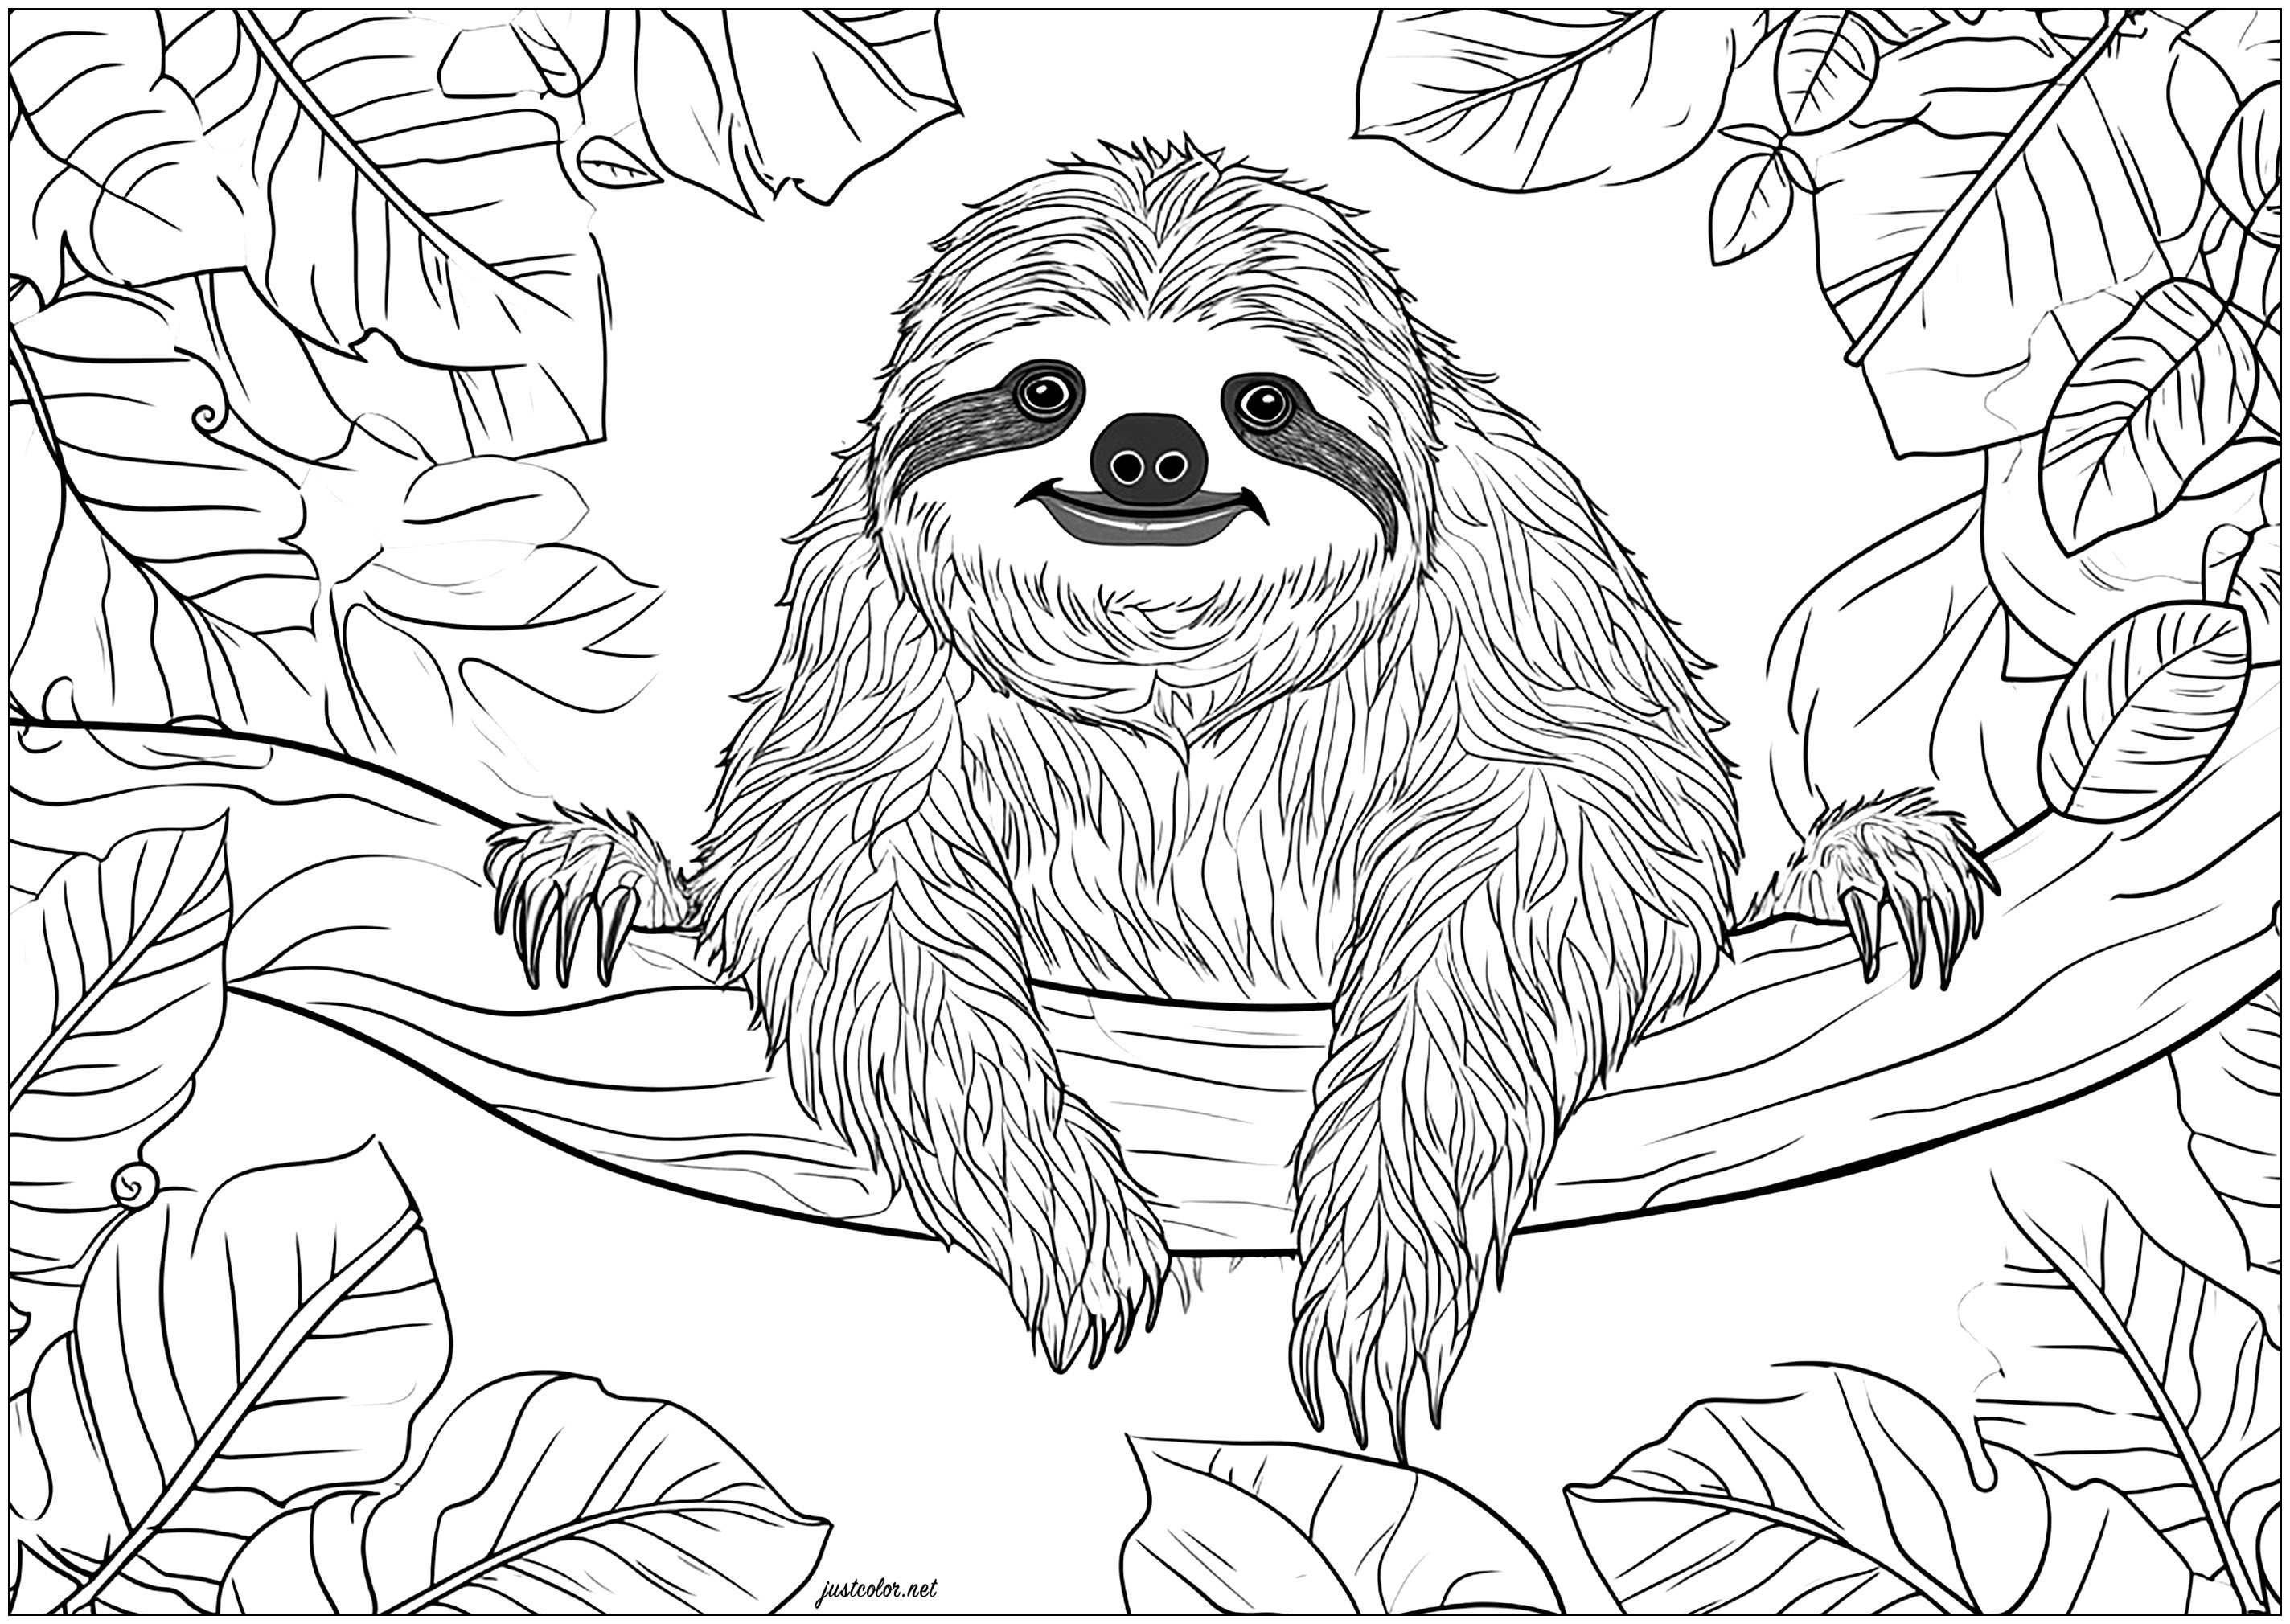 Facetious sloth on a branch